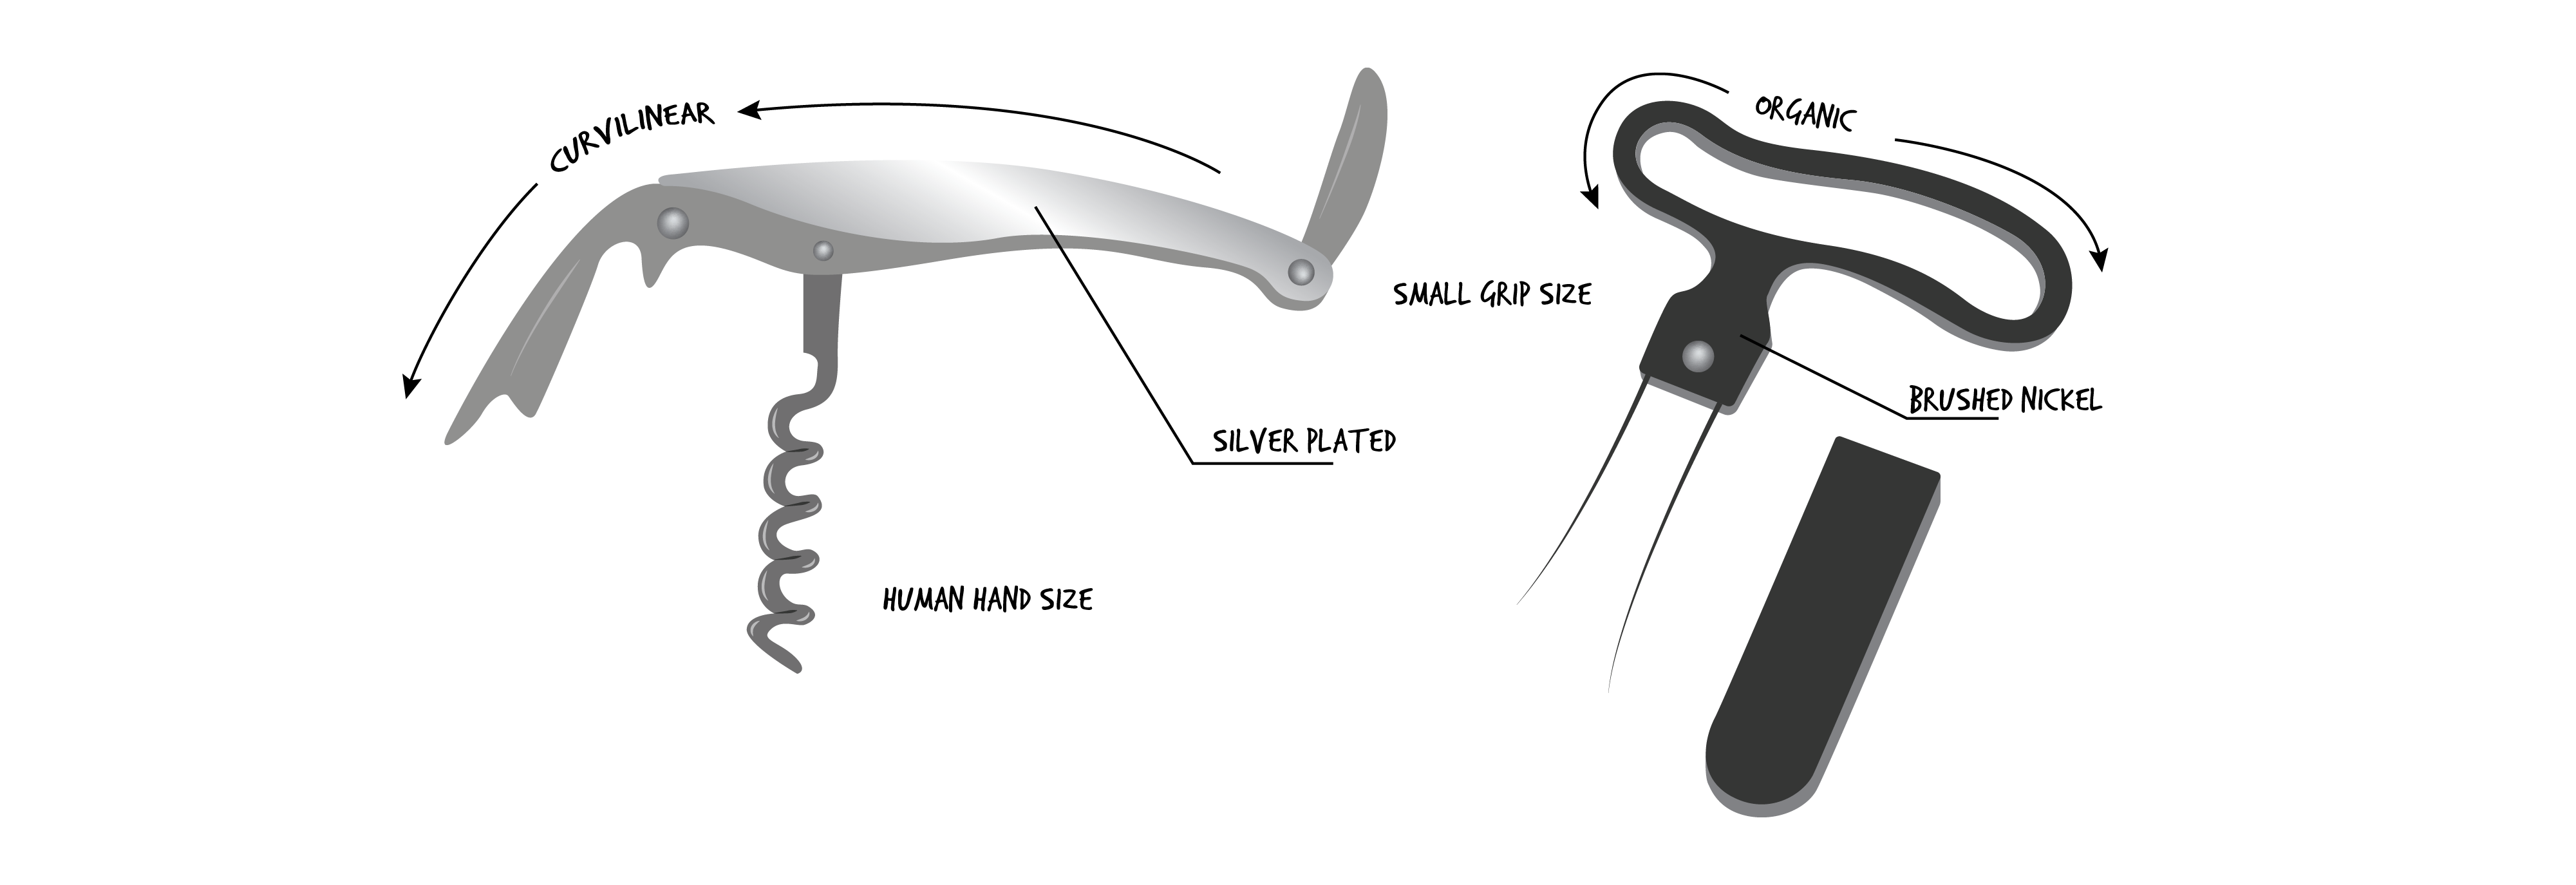 Two wine bottle openers. On the left: a silver cured opener. Text: Curvilinear, silver plated, hand hand size. On the right, a black, circular opener. Text: organic, small grip size, brushed nickel.